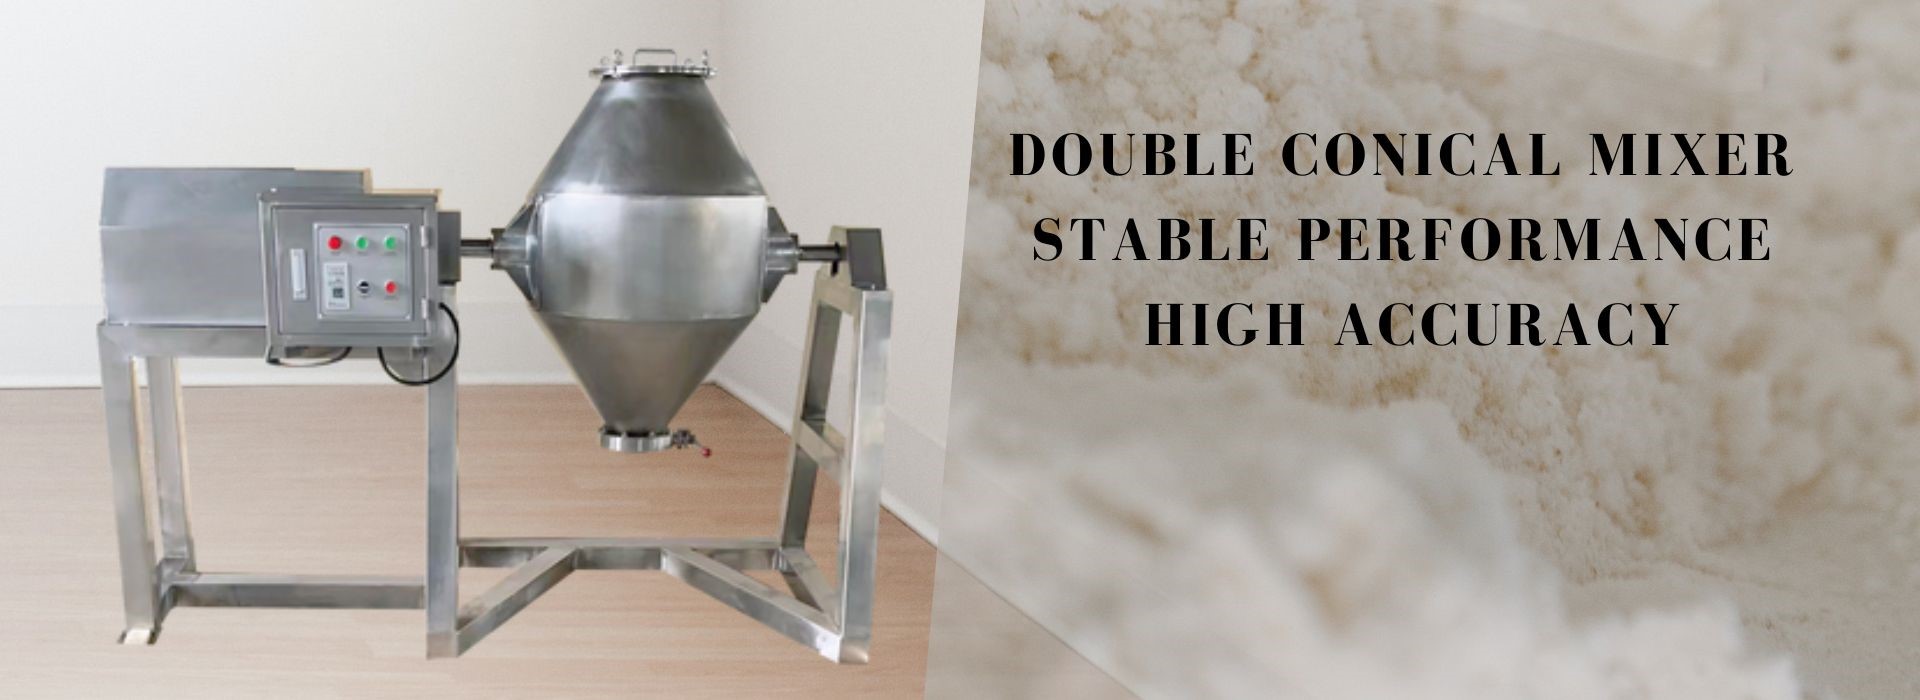 Simple Maintenance and Cleaning for a Double Cone Mixer1